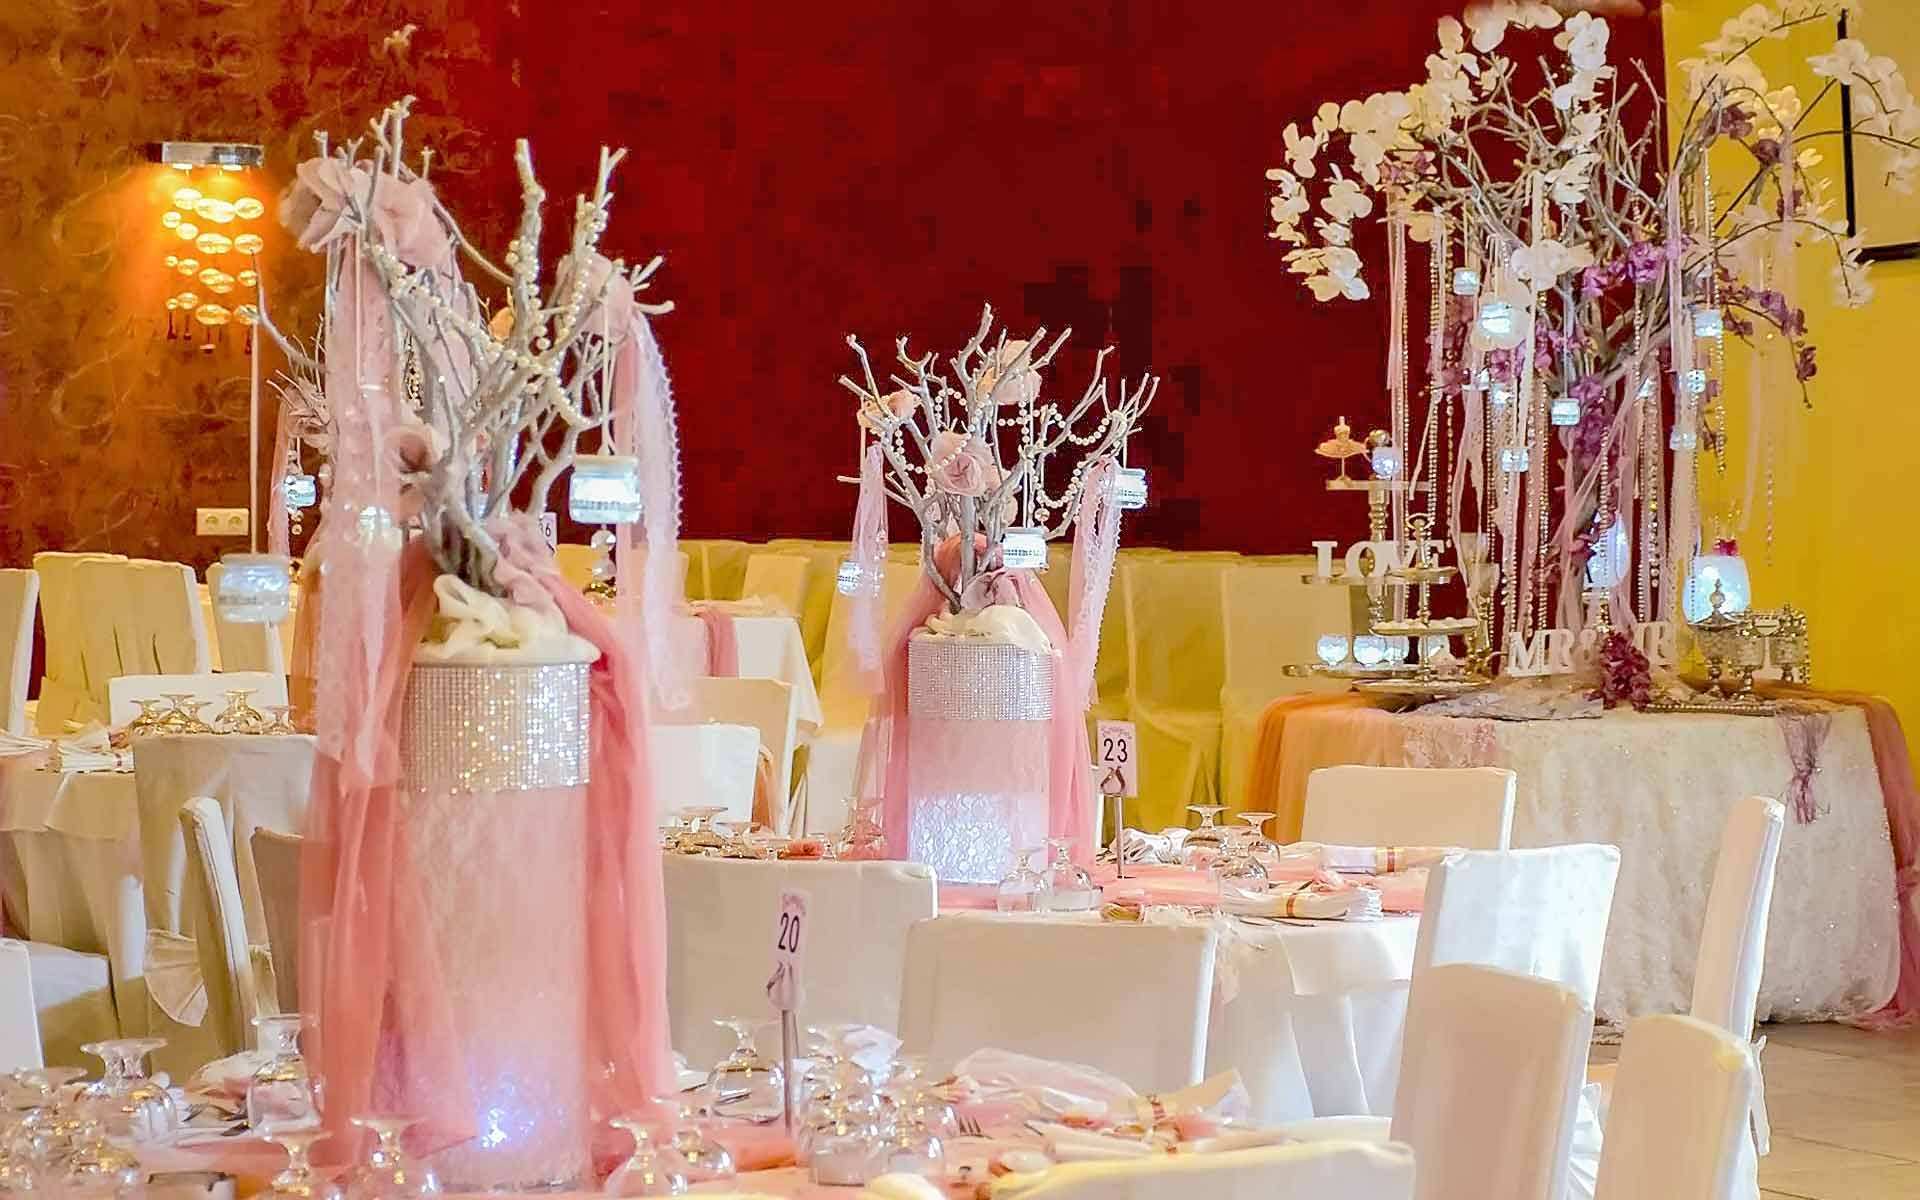 Luxurious-Baptism-Christening-Reception-Venue-With-Orchids-Pearls-And-Pink-Fabrics